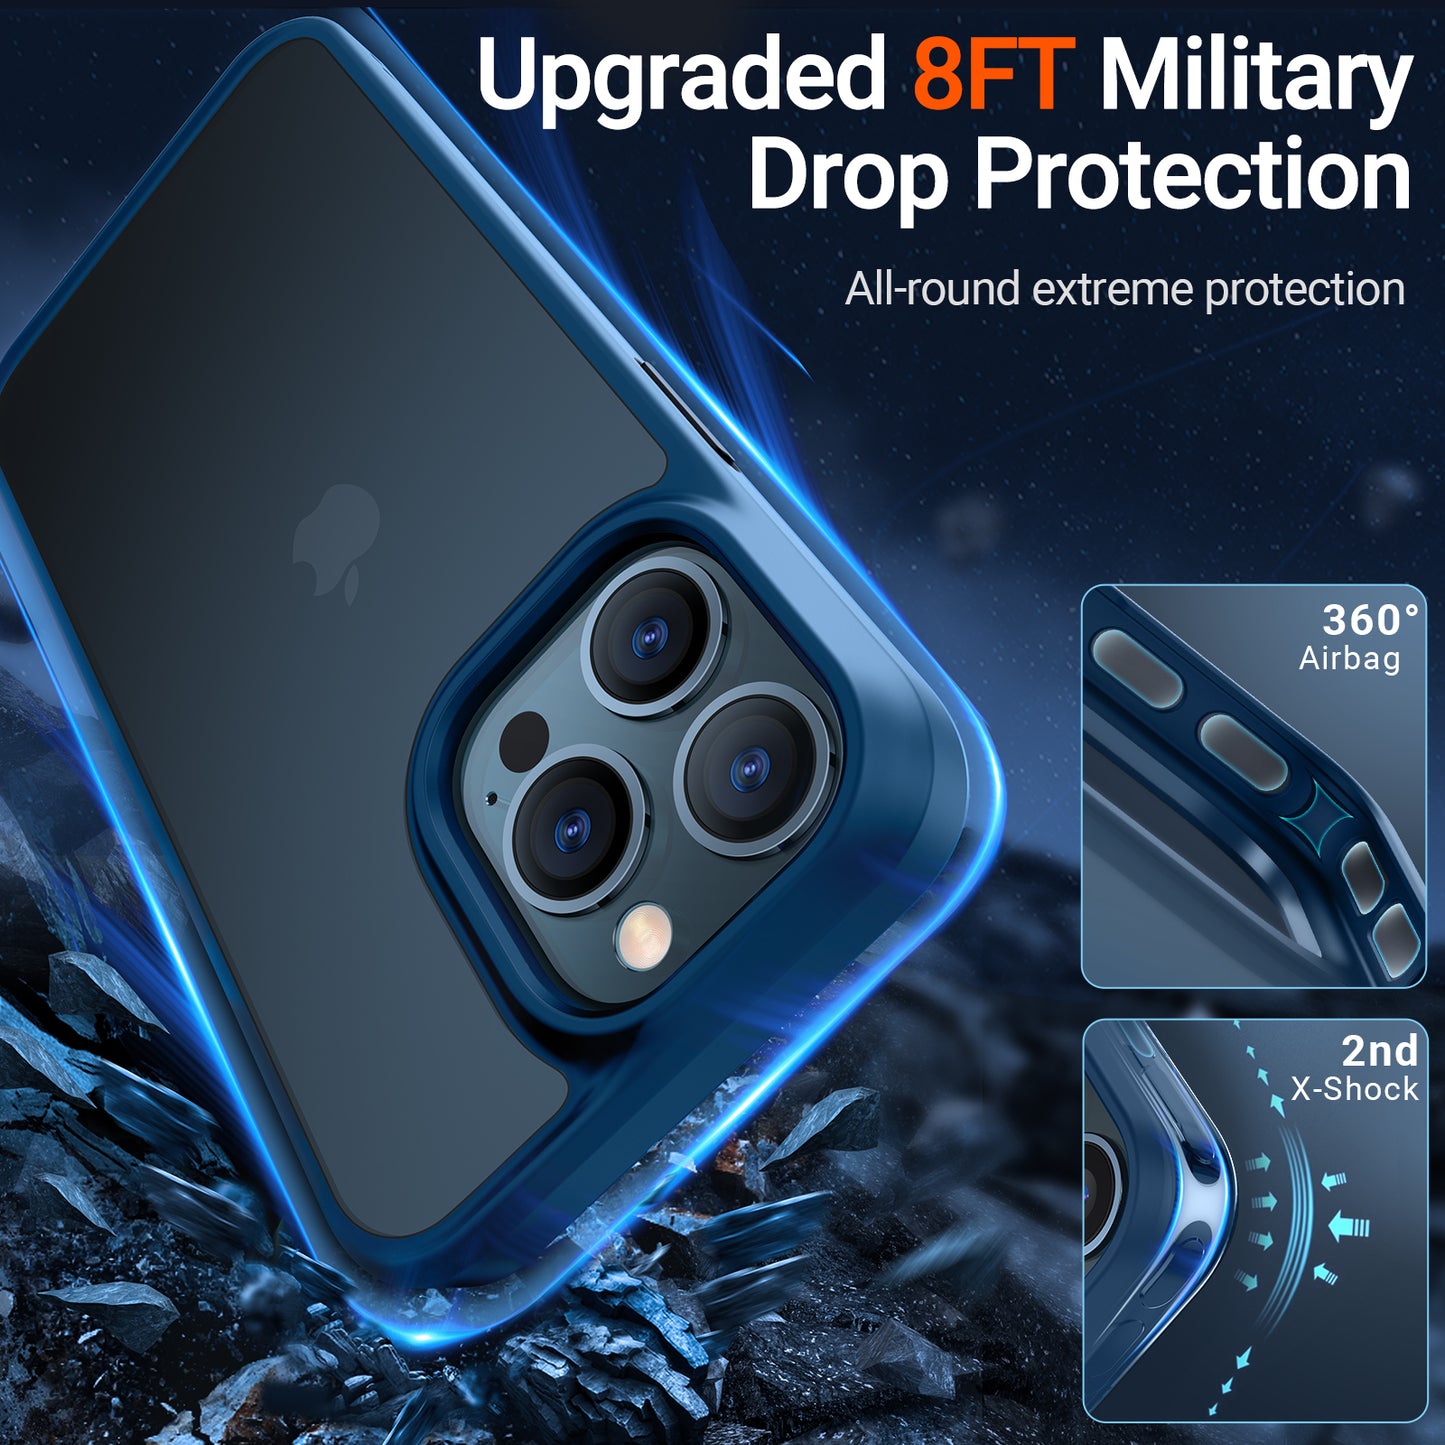 TORRAS Guardian for iPhone 13 | Military Grade Shockproof